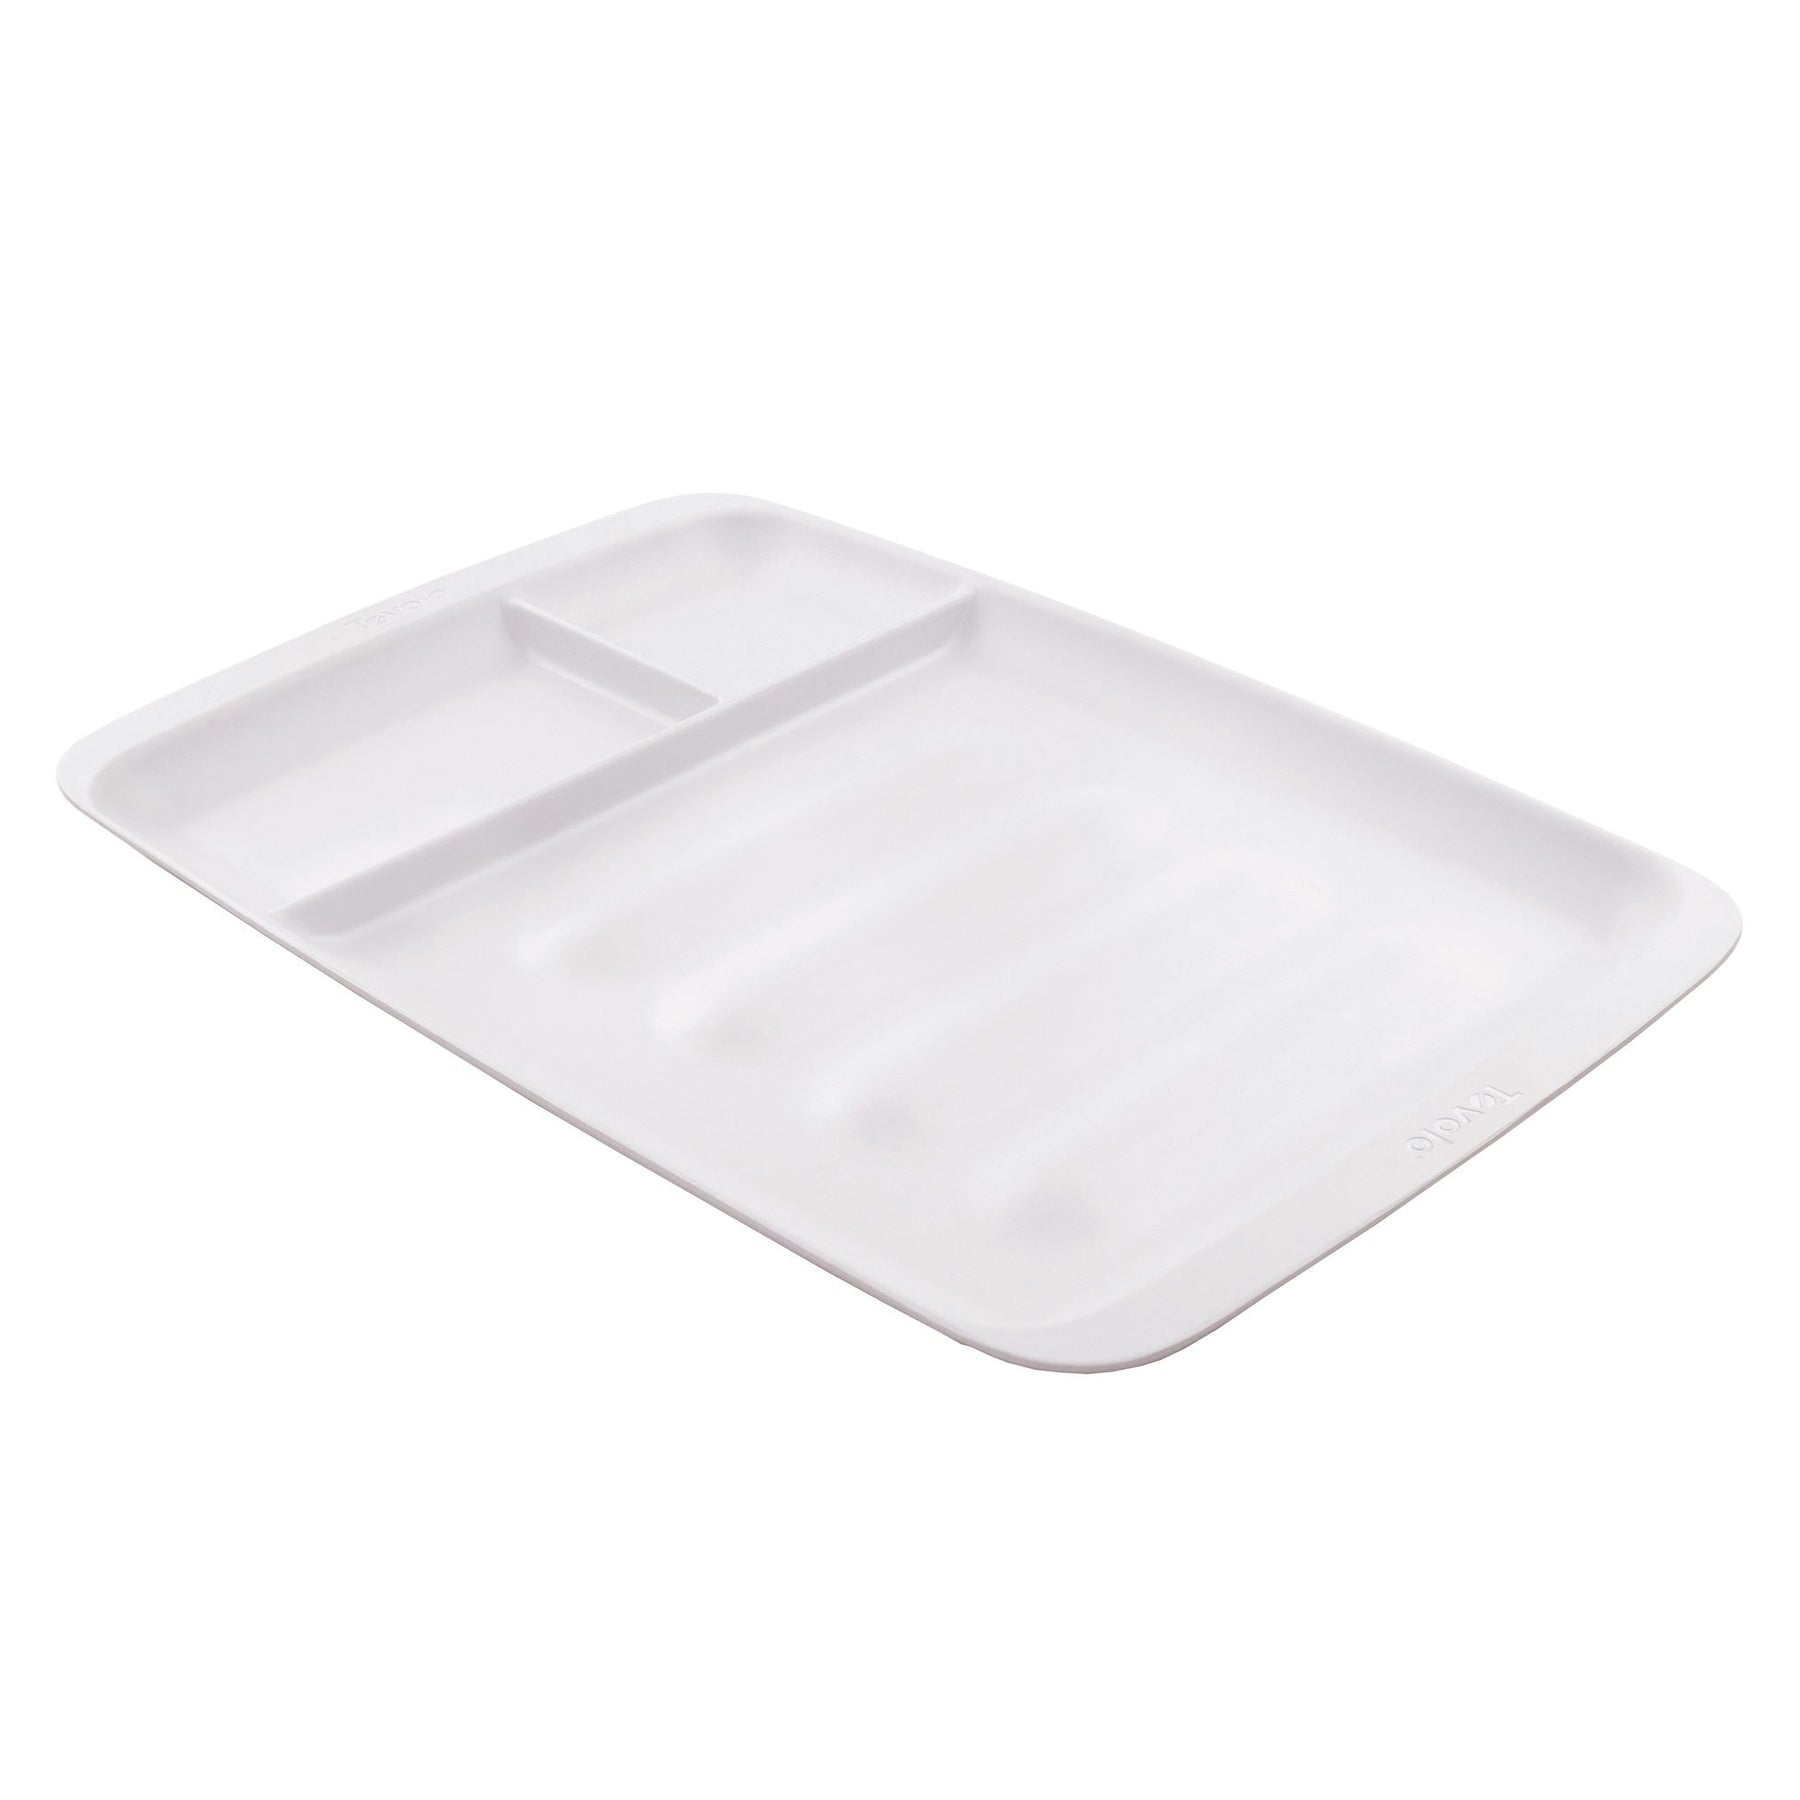 Tovolo Prep & Serve BBQ Grill Trays on Food52